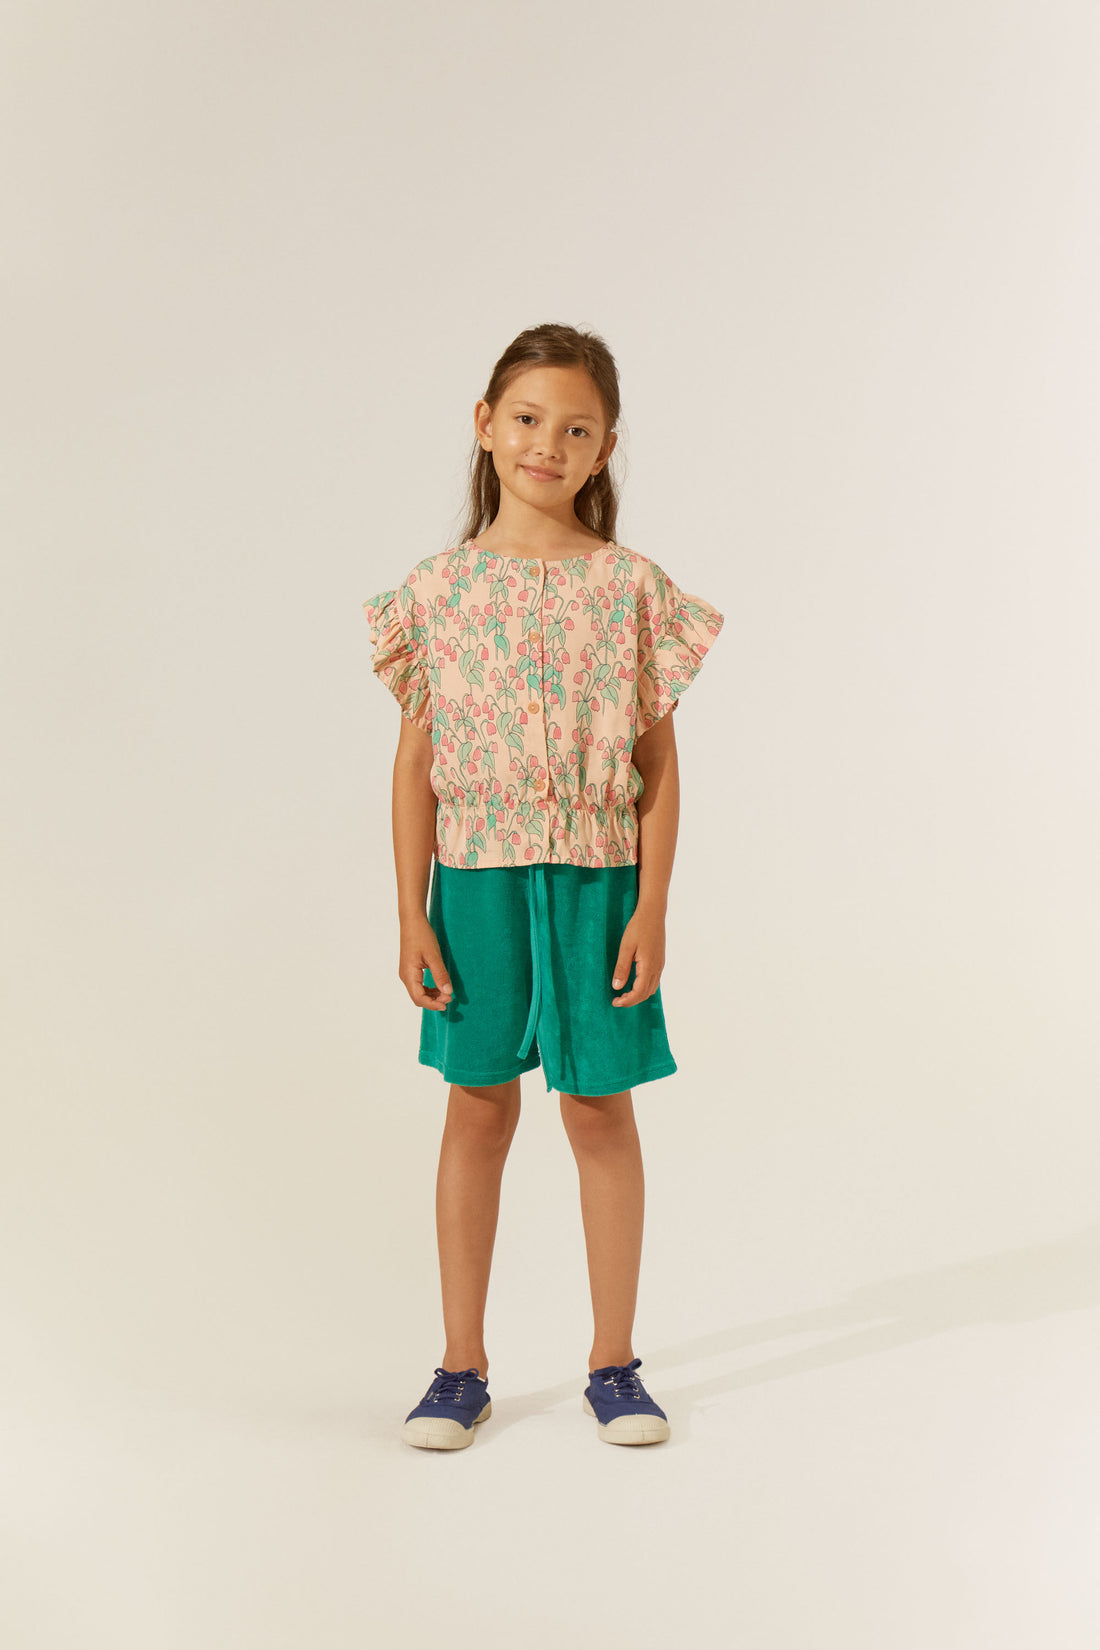 The Campamento Peach Flowers Blouse